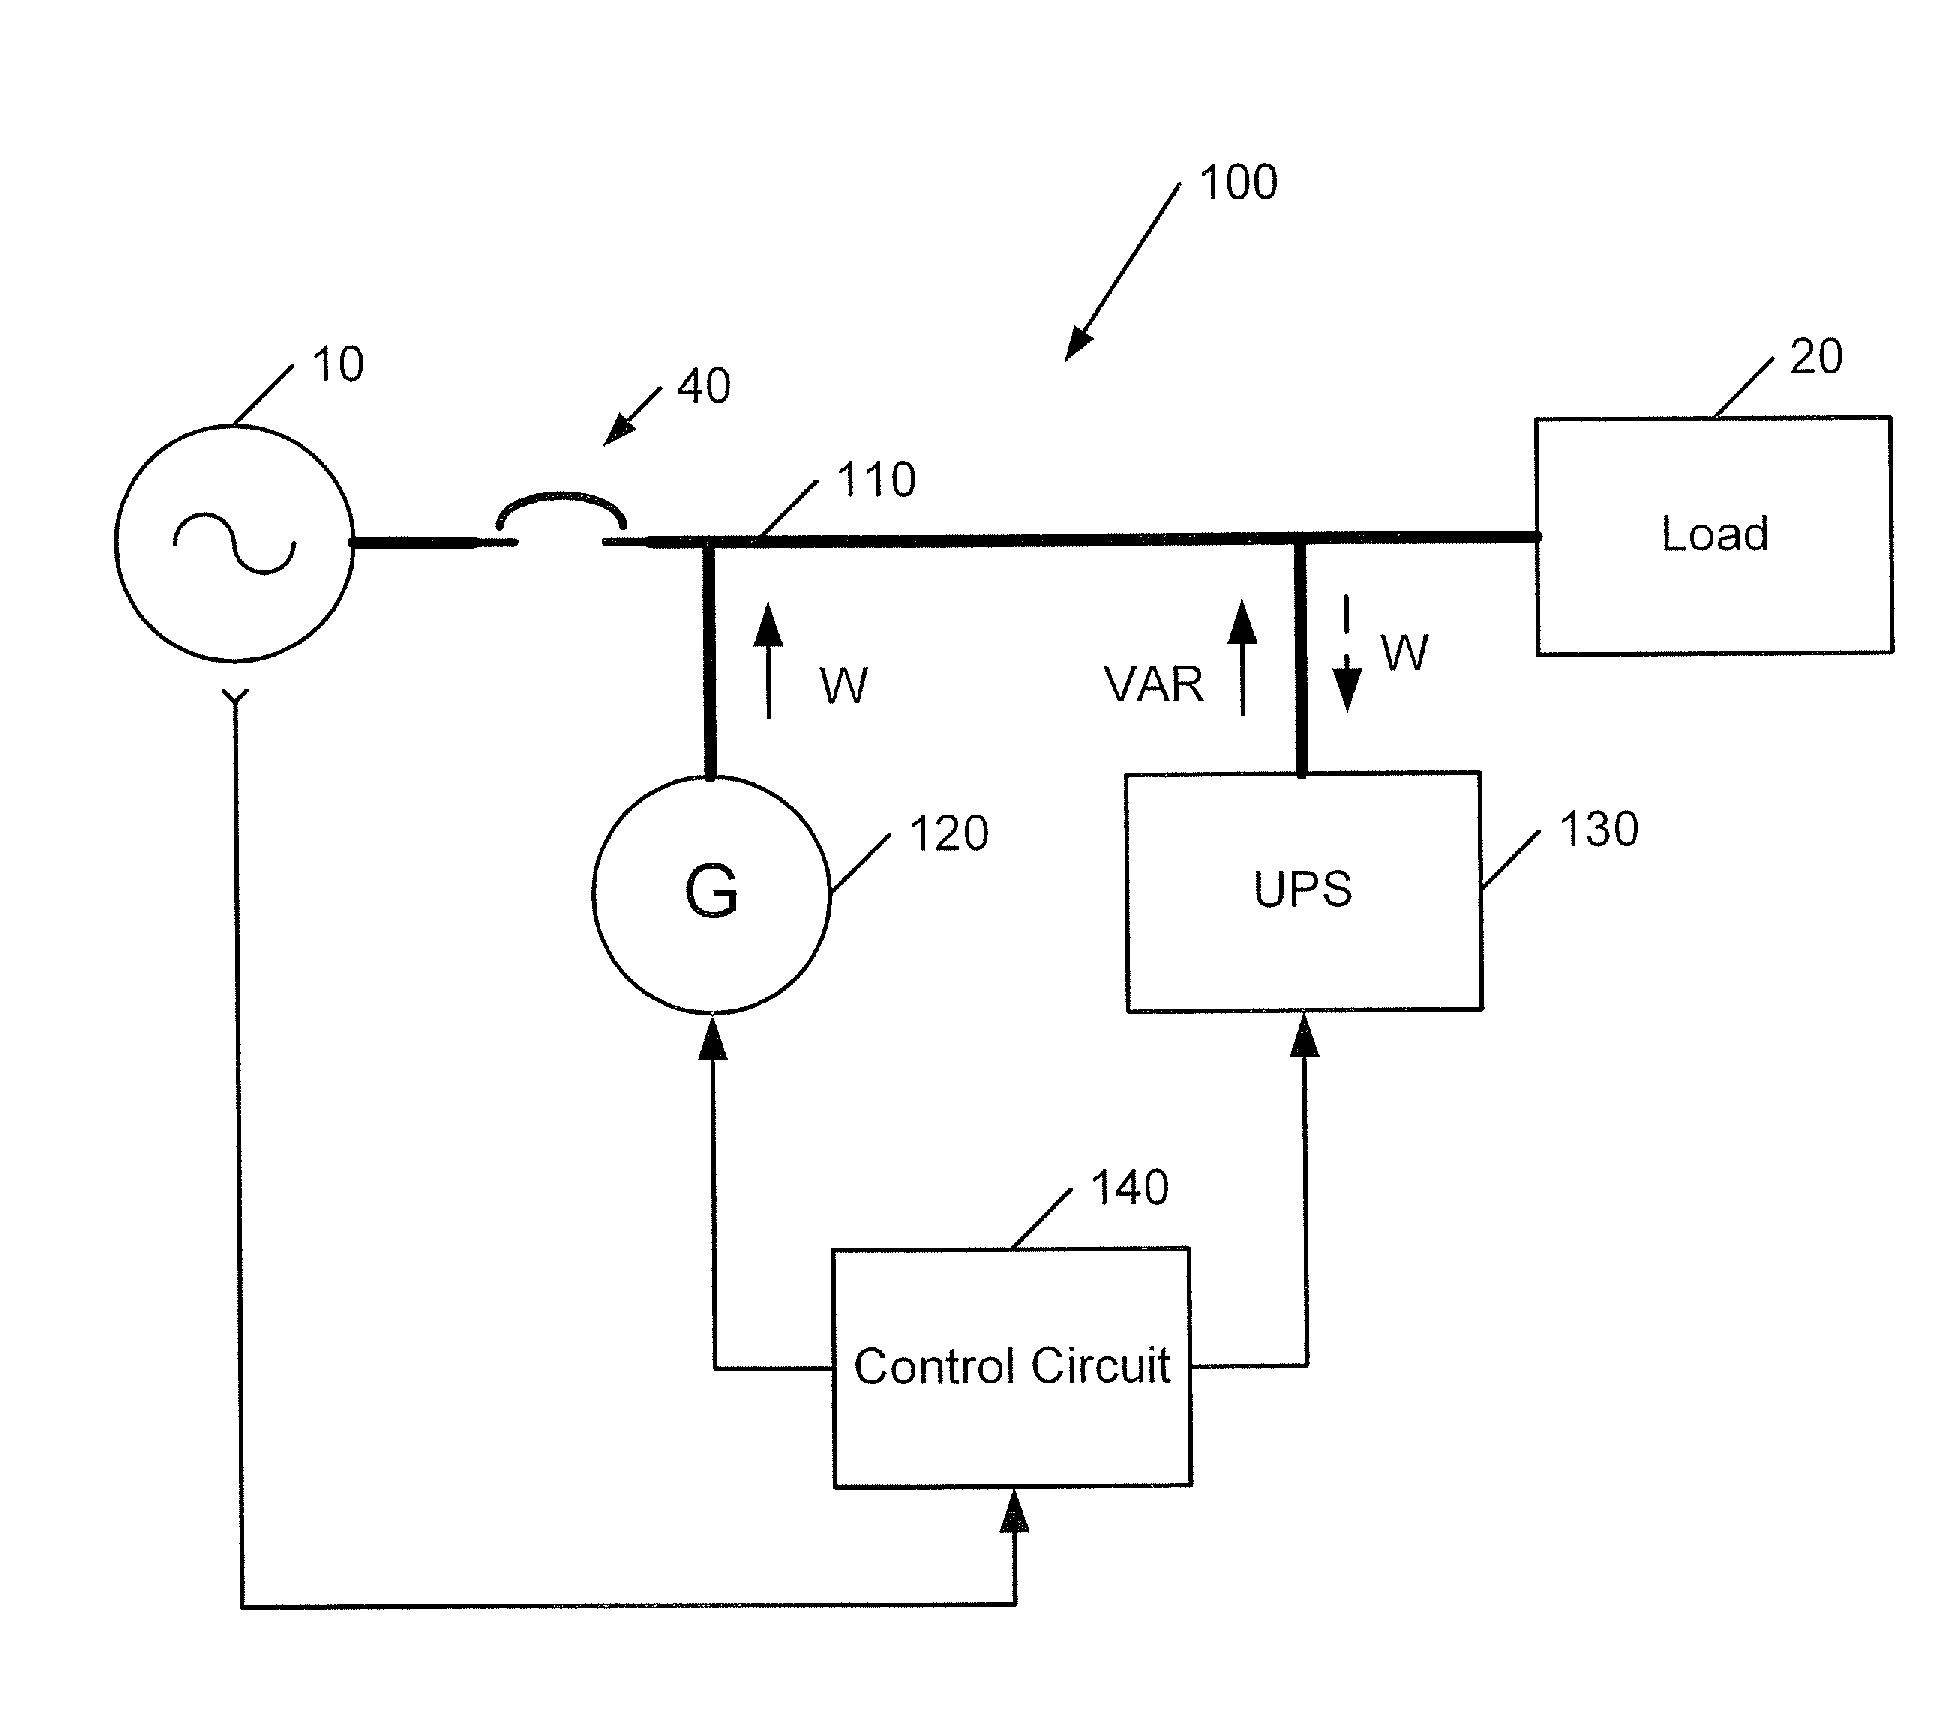 Power Systems and Methods Using an Induction Generator in Cooperation with an Uninterruptible Power Supply